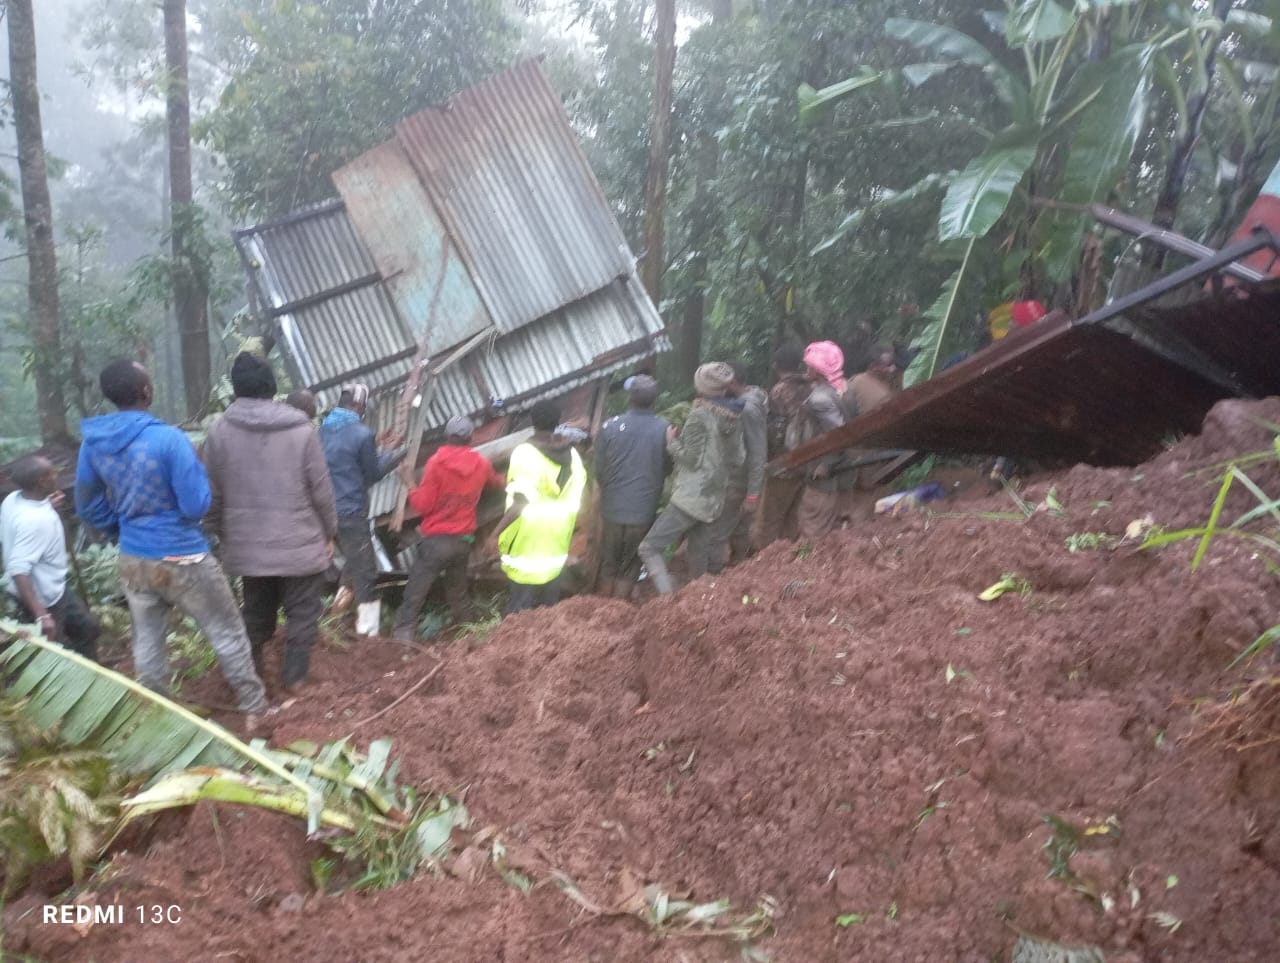 Search and rescue operation in Gitugi village, Murang'a County after landslides destroyed houses. Photo/TV47